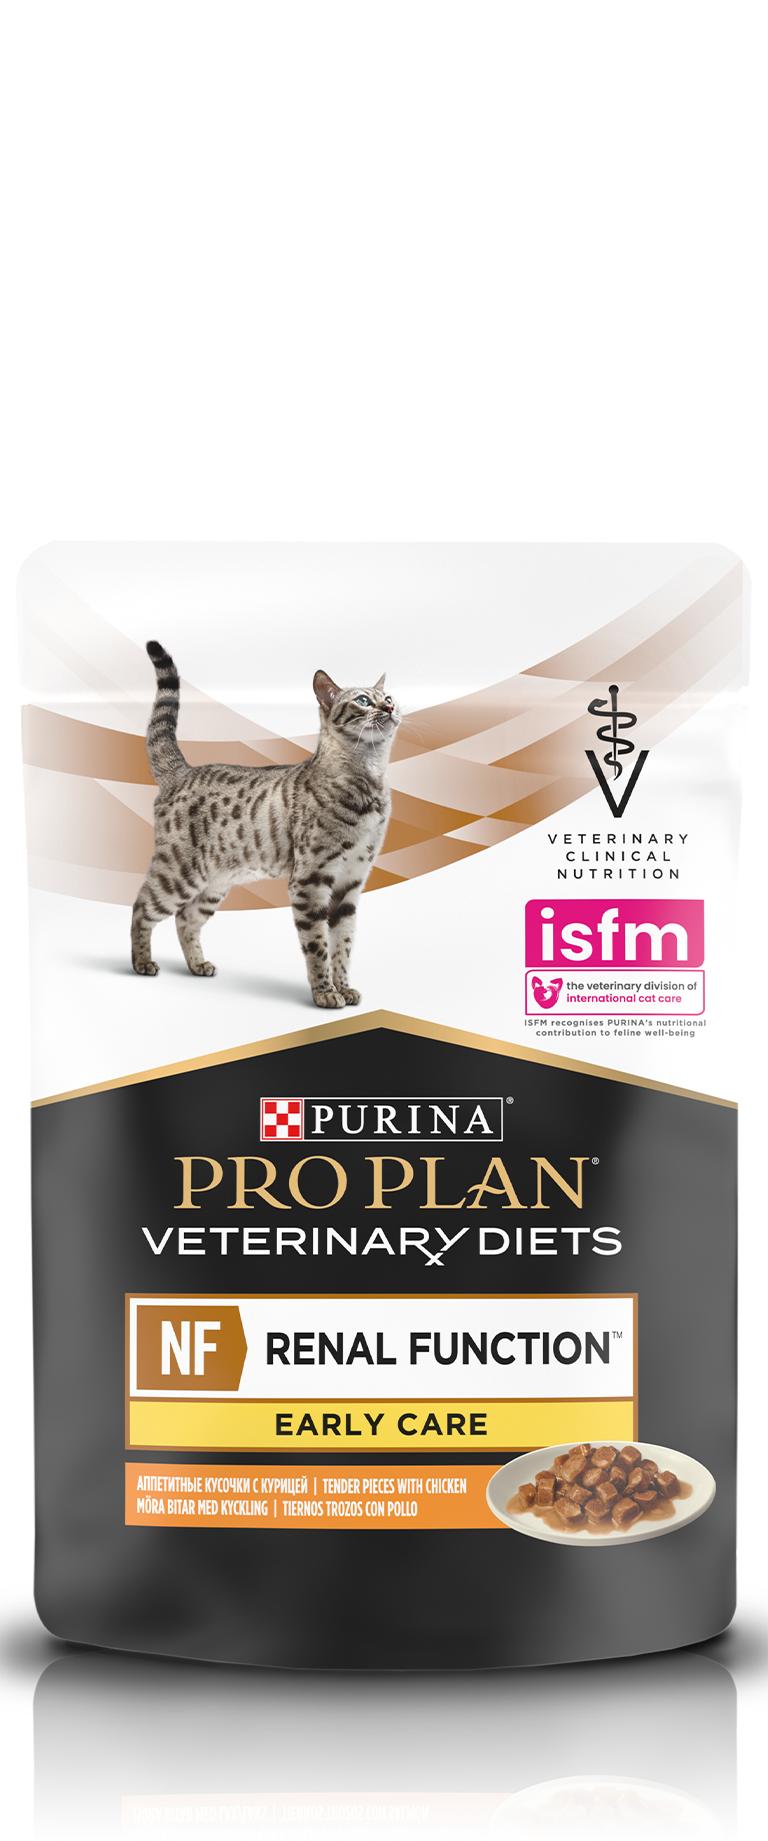 PRO PLAN® VETERINARY DIETS NF RENAL FUNCTION EARLY CARE